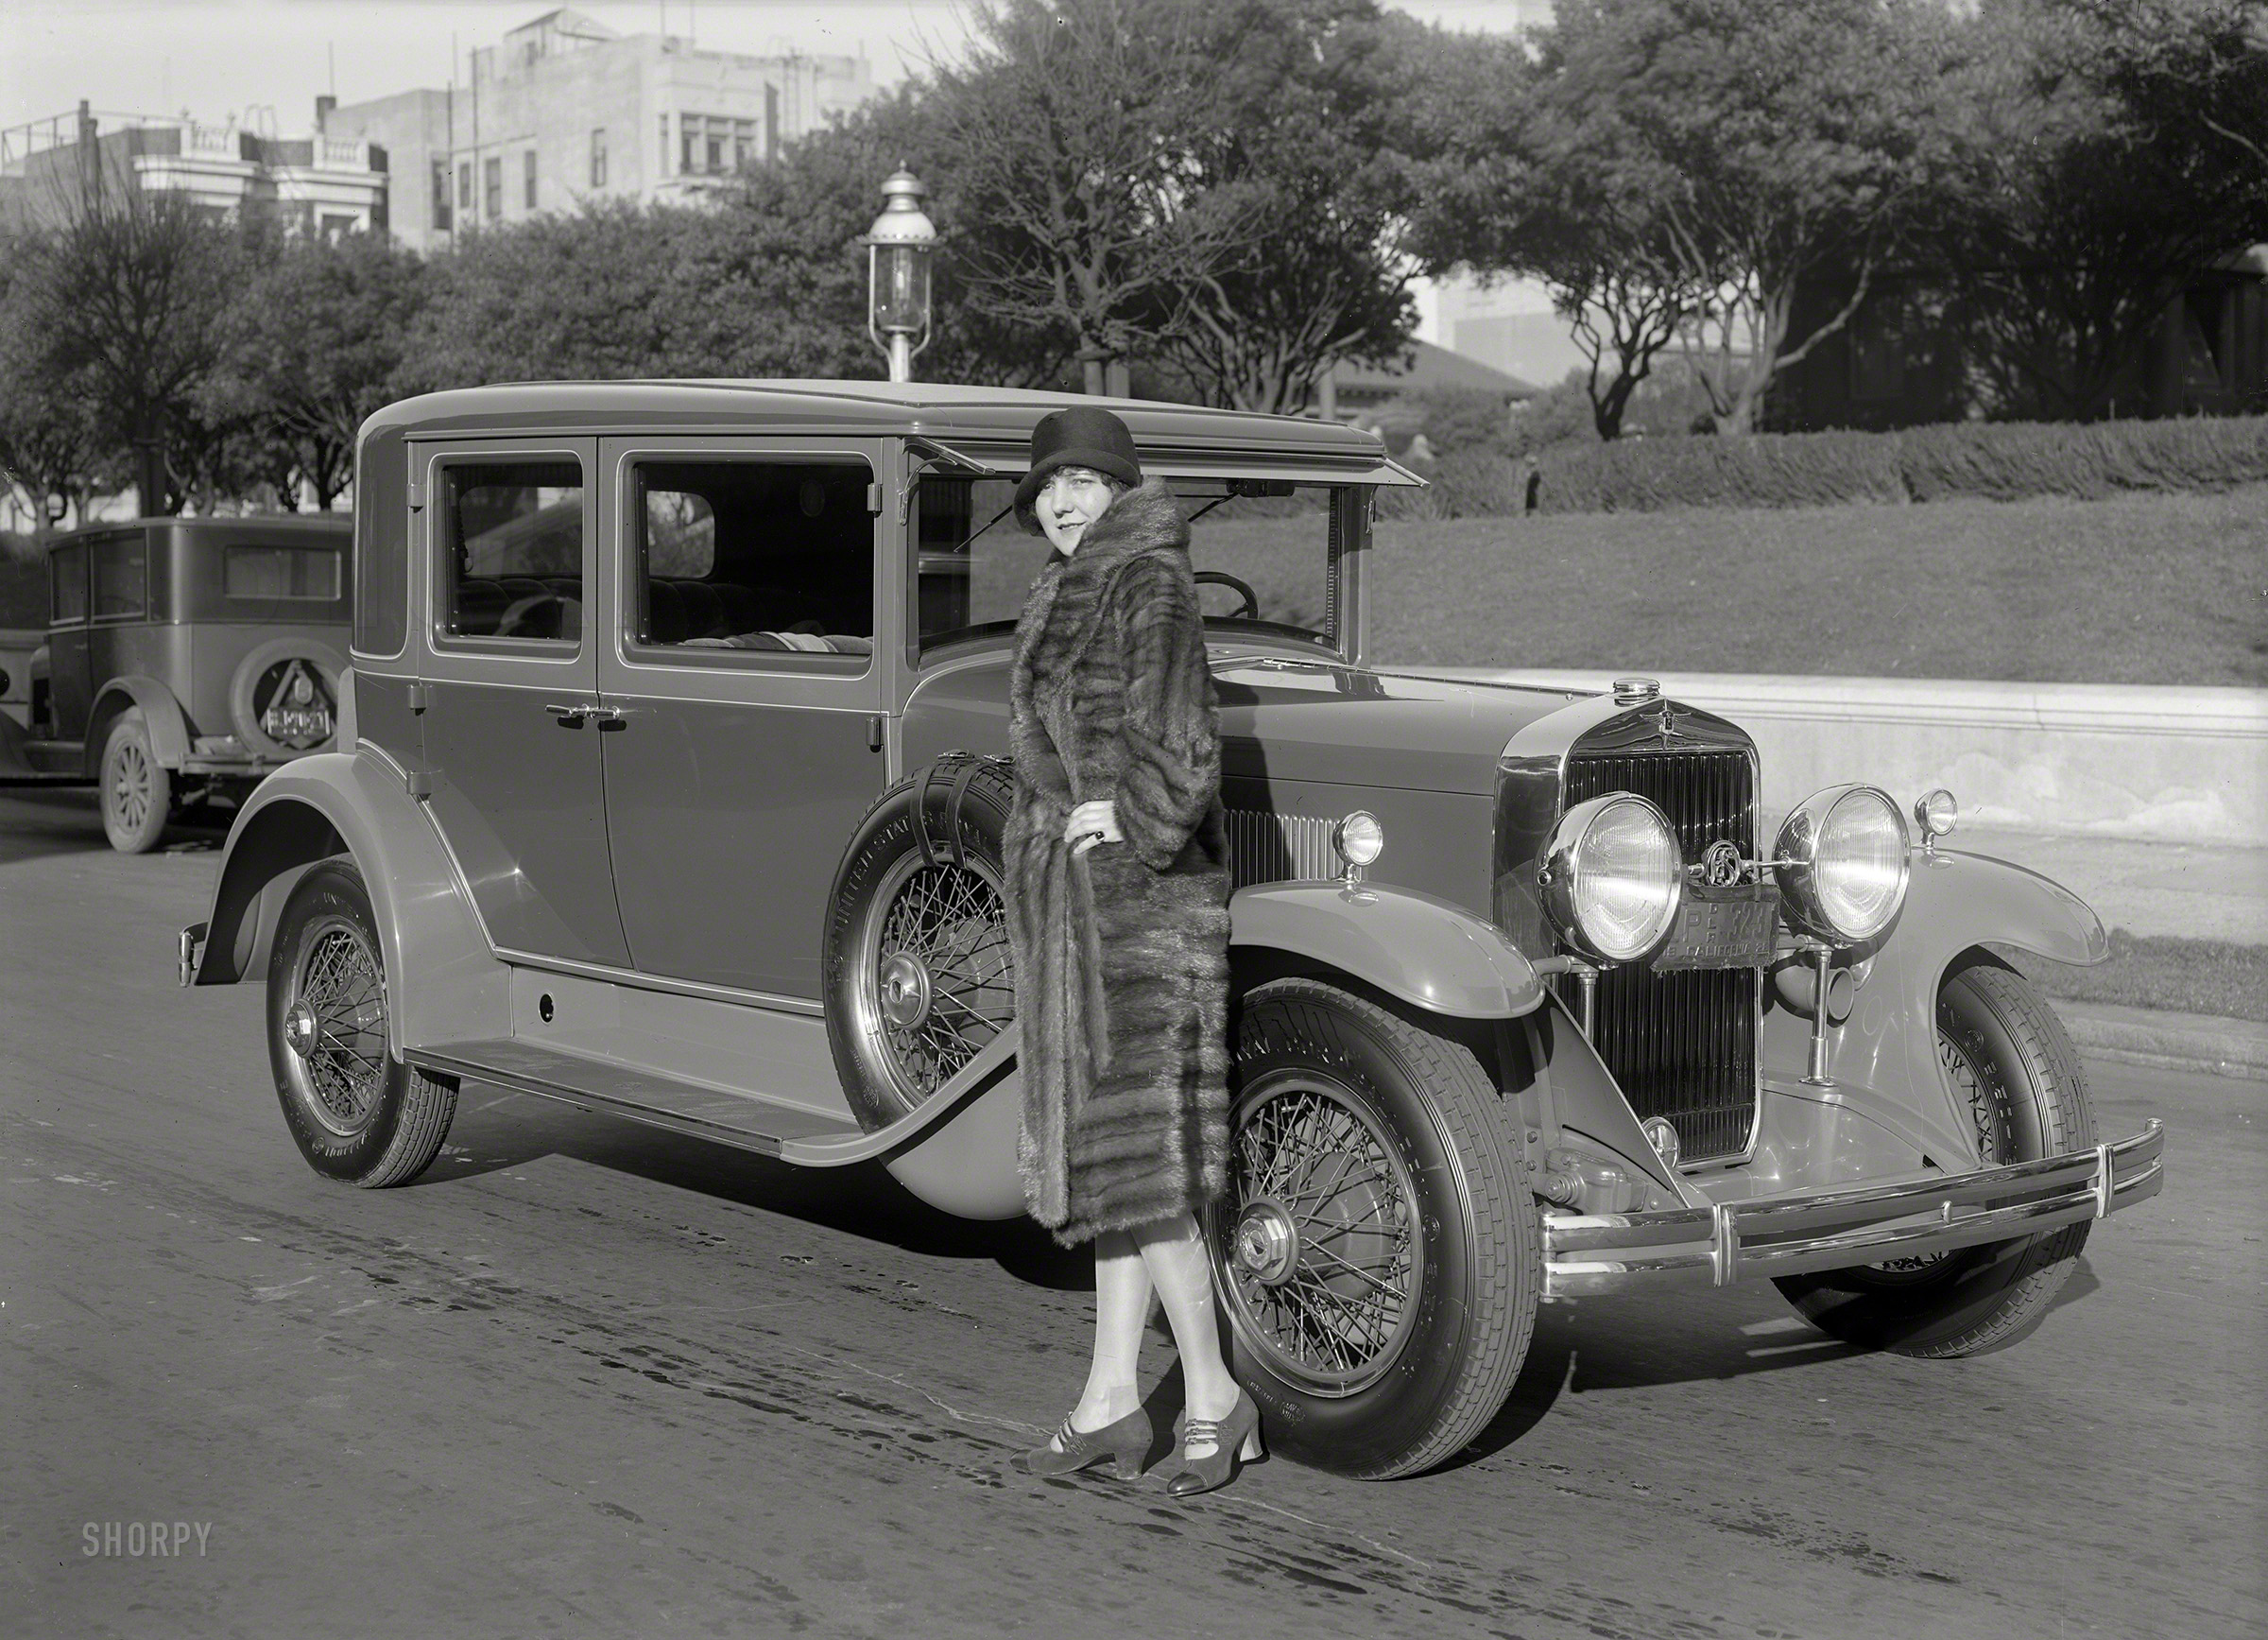 San Francisco, 1928. "LaSalle 328 sedan." Latest entry in the Shorpy Register of Ill-Fated Phaetons. 5x7 glass negative by Christopher Helin. View full size.